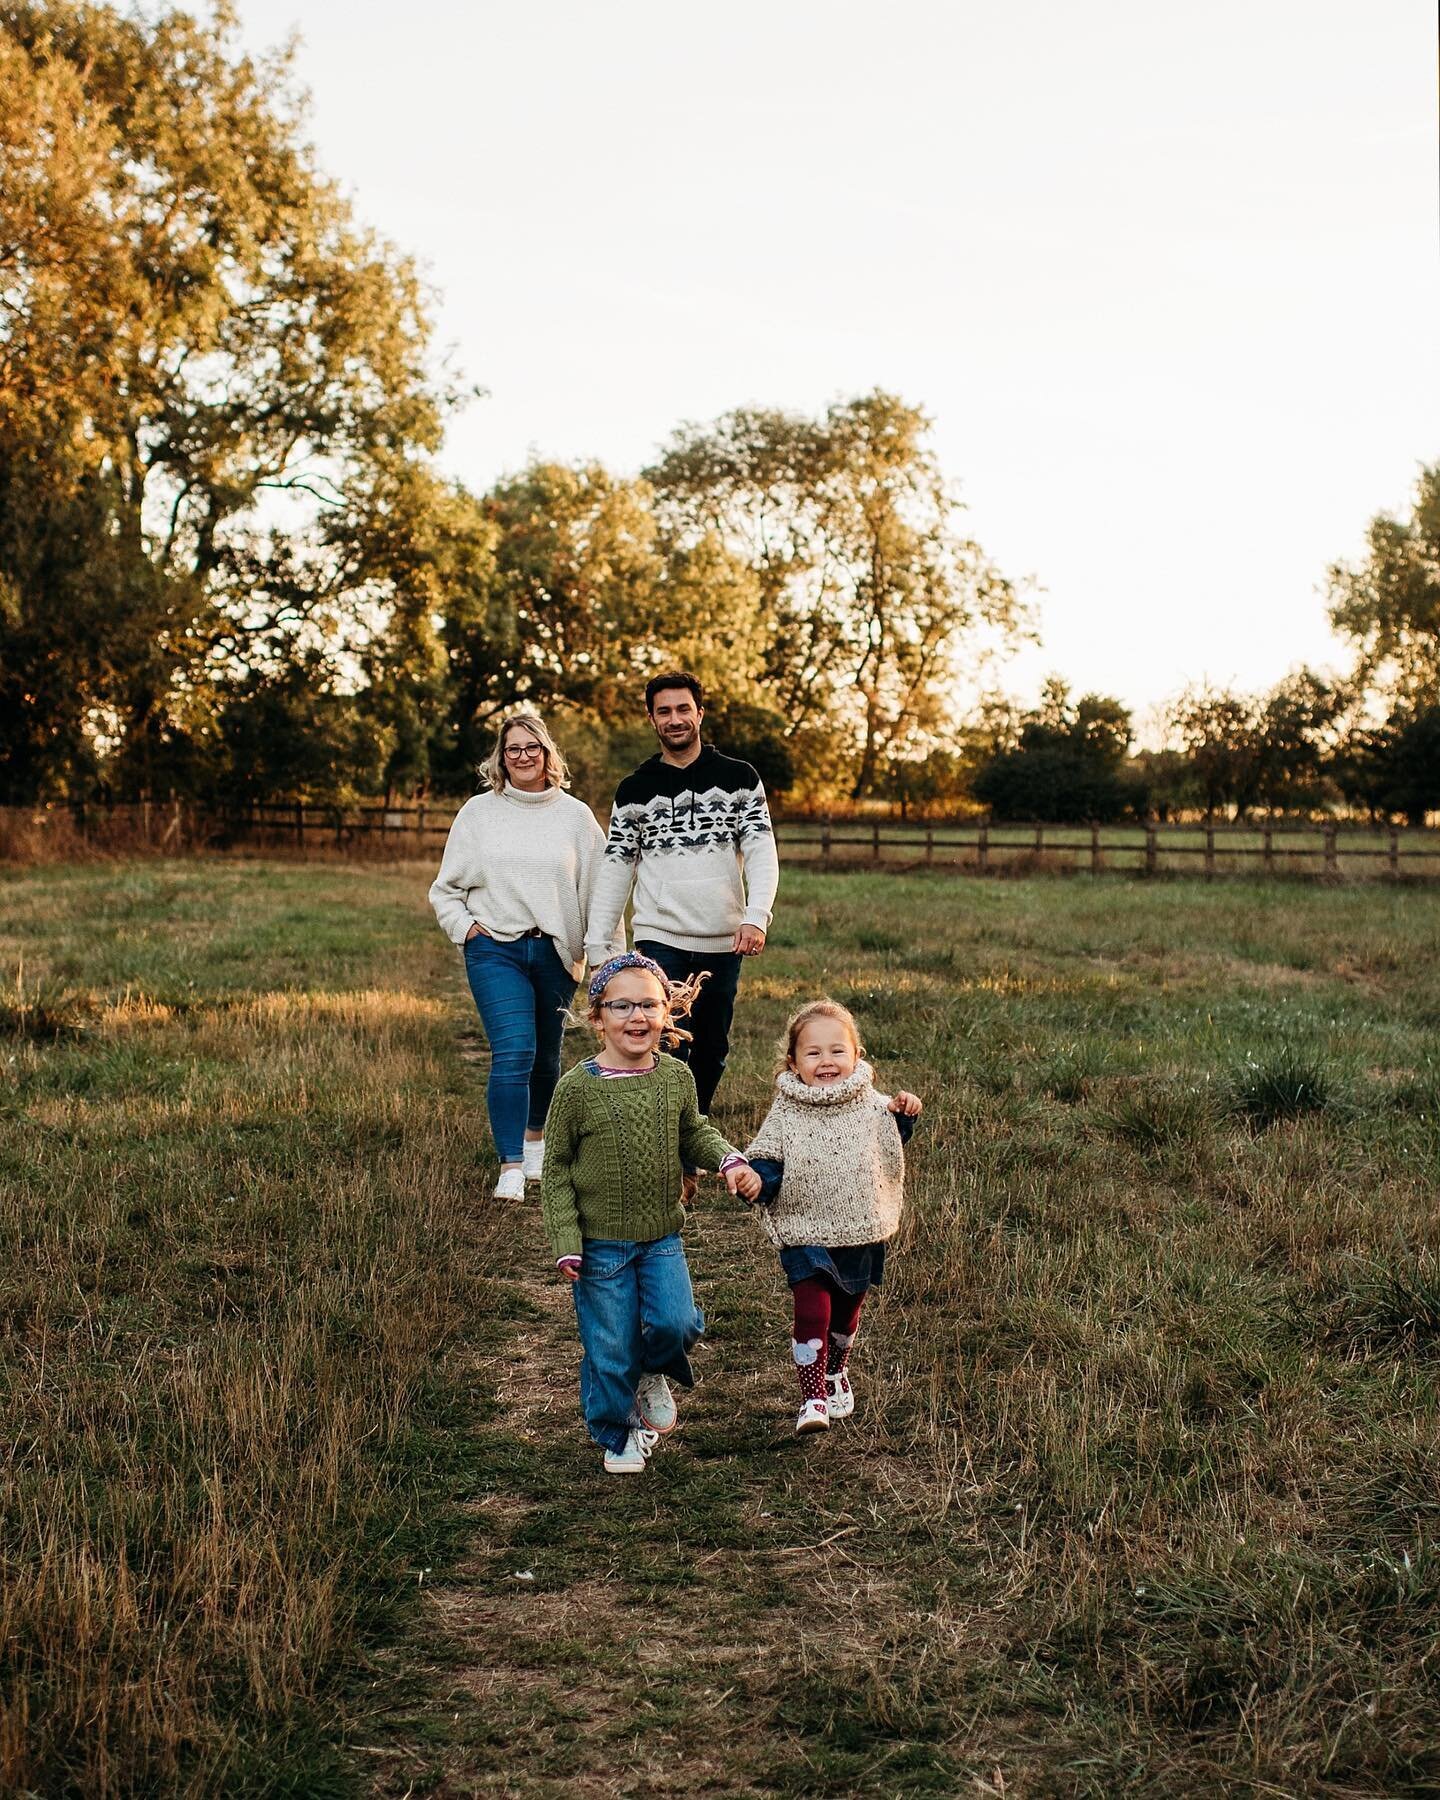 I&rsquo;m living for these gorgeous autumn colours at the moment! I&rsquo;ve been photographing @kylieada family for a couple of years now and it&rsquo;s been so lovely to watch their girls grow - I think this session was one of my faves! You just ca